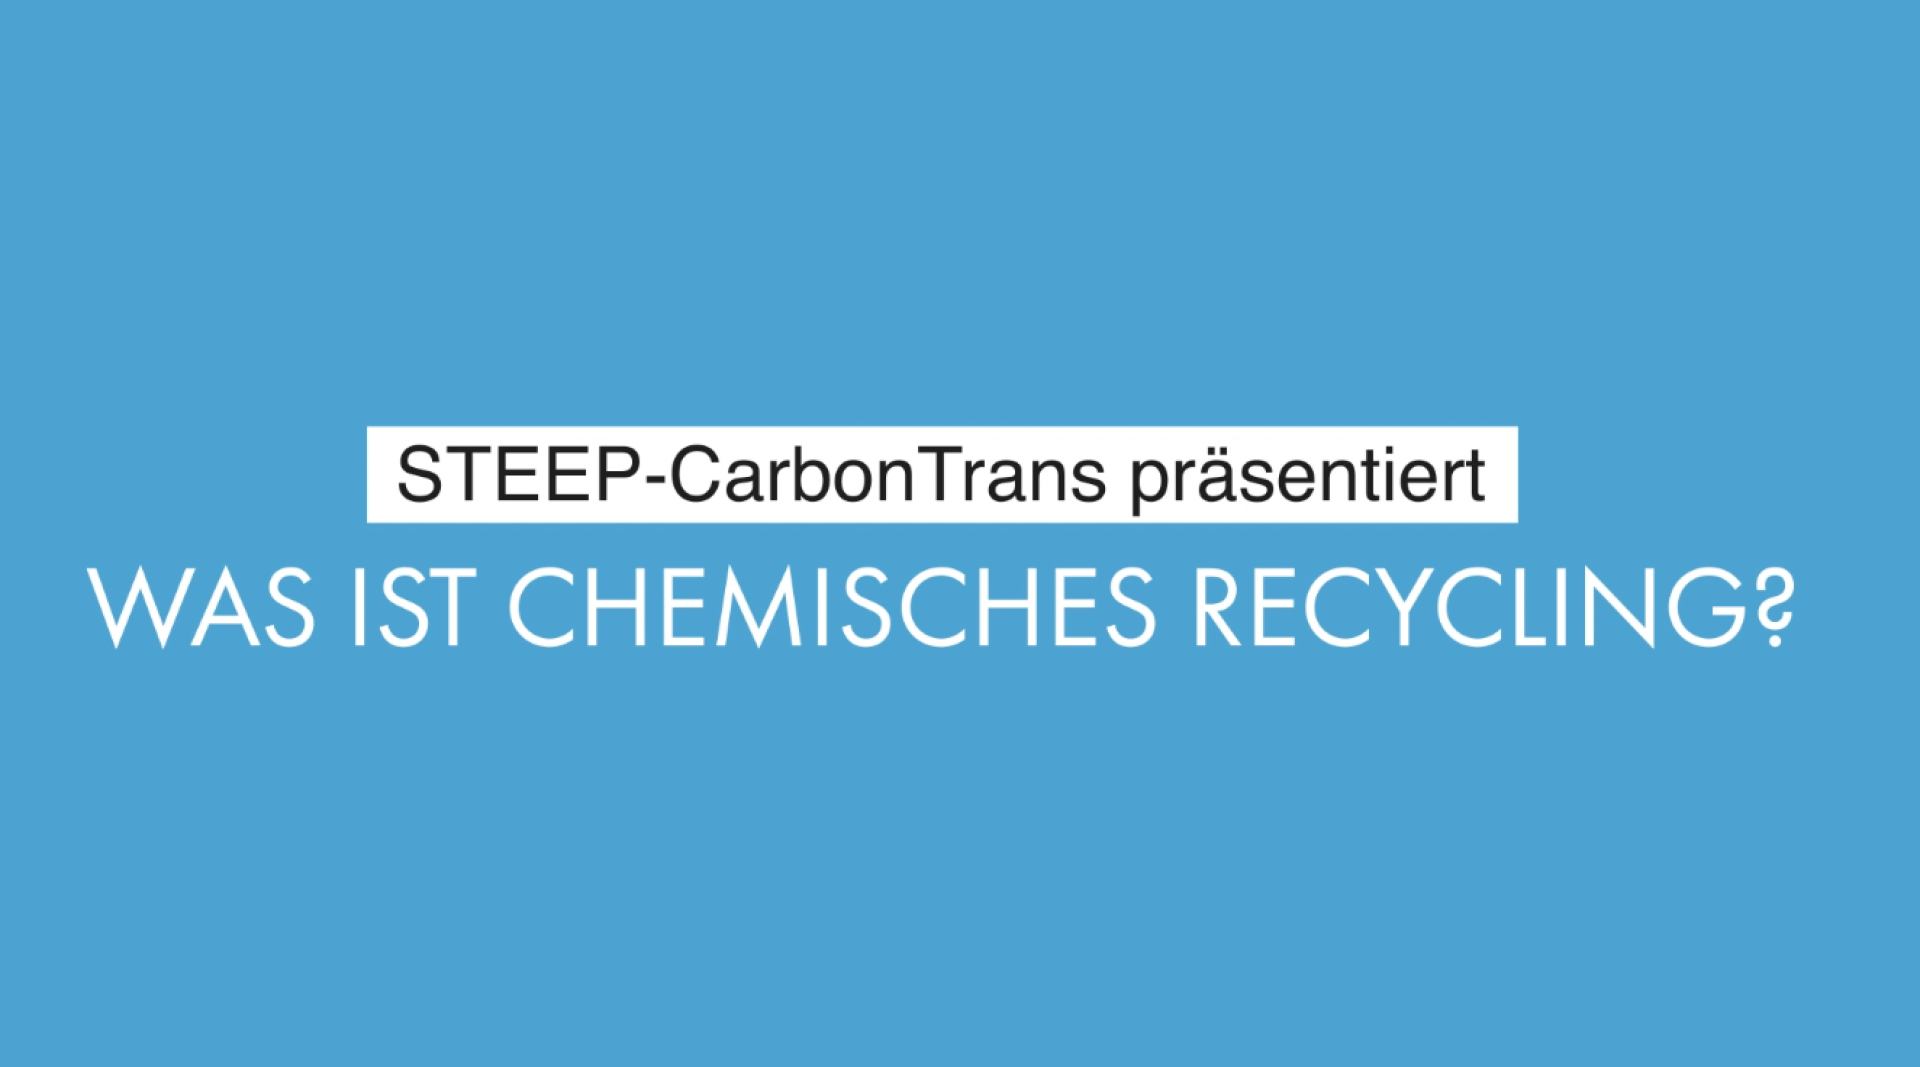 STEEP-CarbonTrans_Was ist chemisches Recycling? DEU